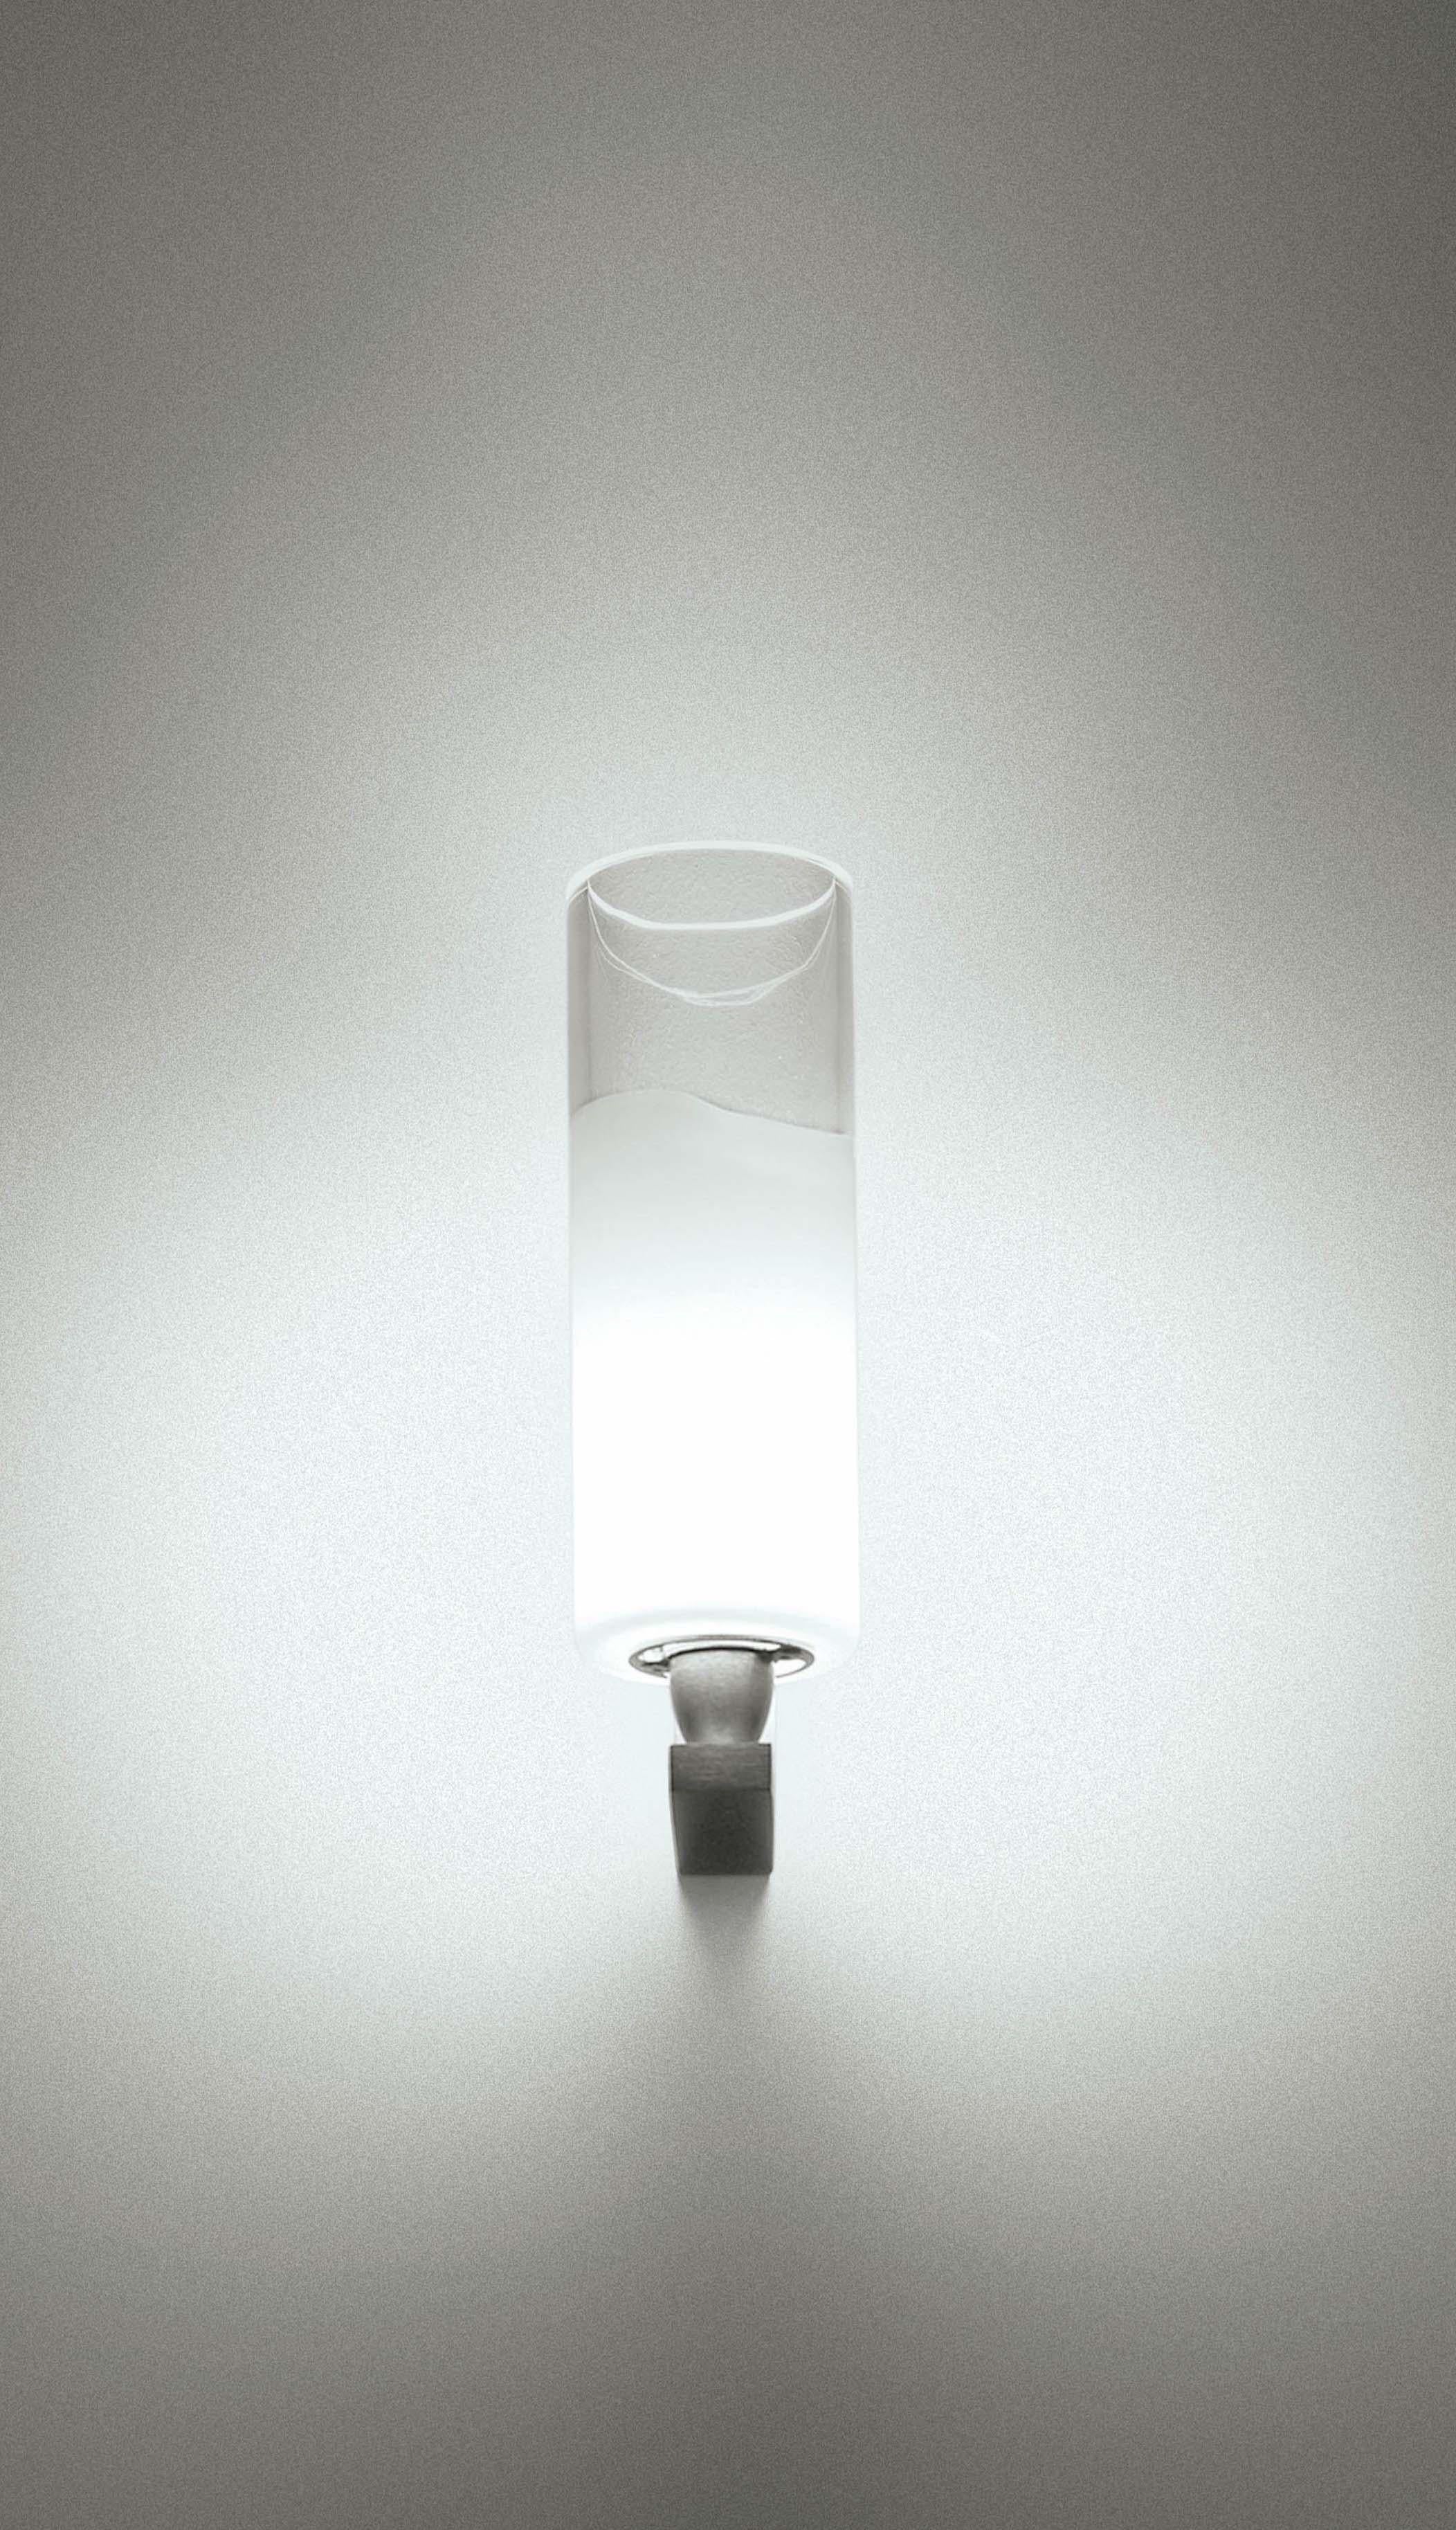 A comprehensive range of lamps that share a minimal, unobtrusive design that makes the most of the light source with the lucid white band inserted in the glass.

Specifications: 
Light Source: G9
No of Bulbs: 1×60W G9
Dimmer: DIM 1
Frame